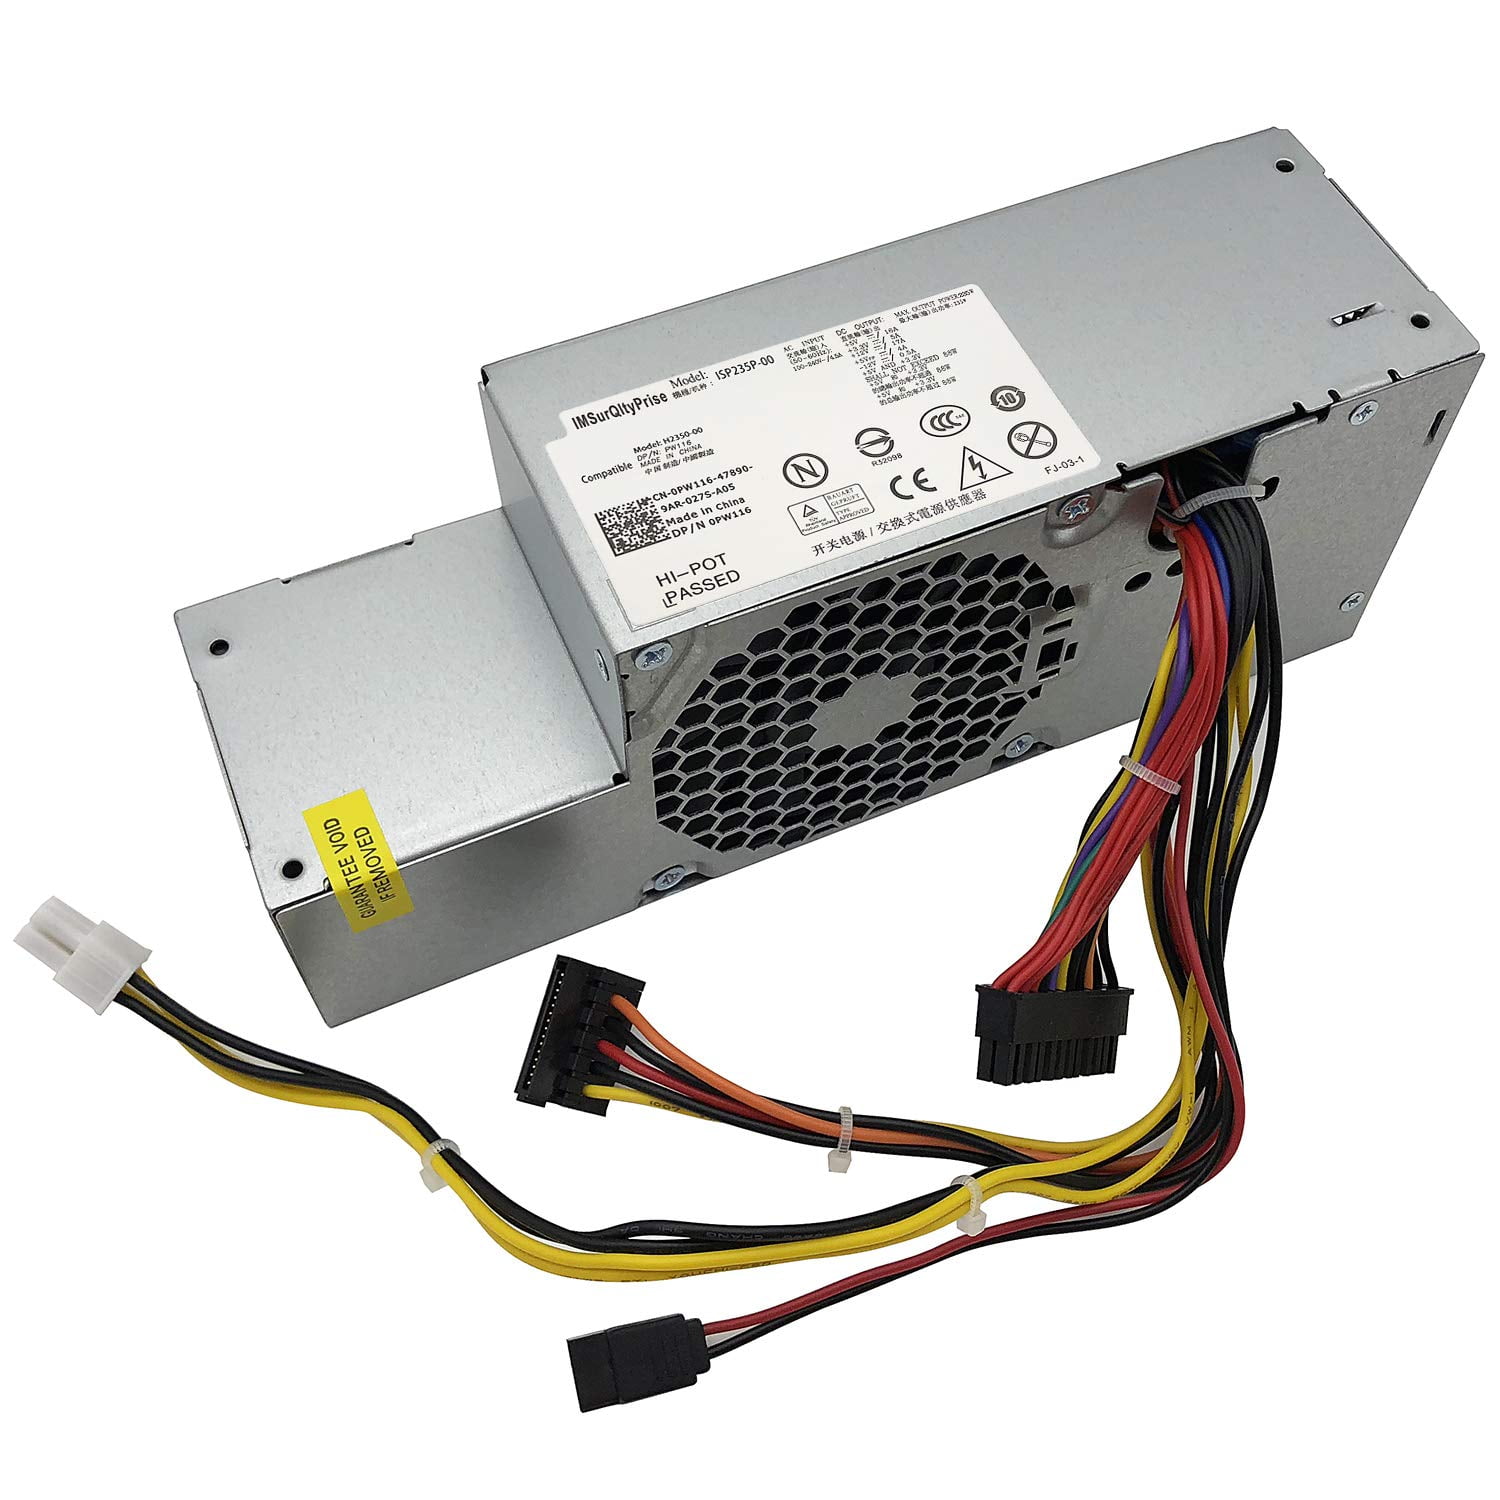 ~100% BRAND NEW~ Dell 760 780 960 980 SFF 235W Power Supply RM112 WU136 PW116 